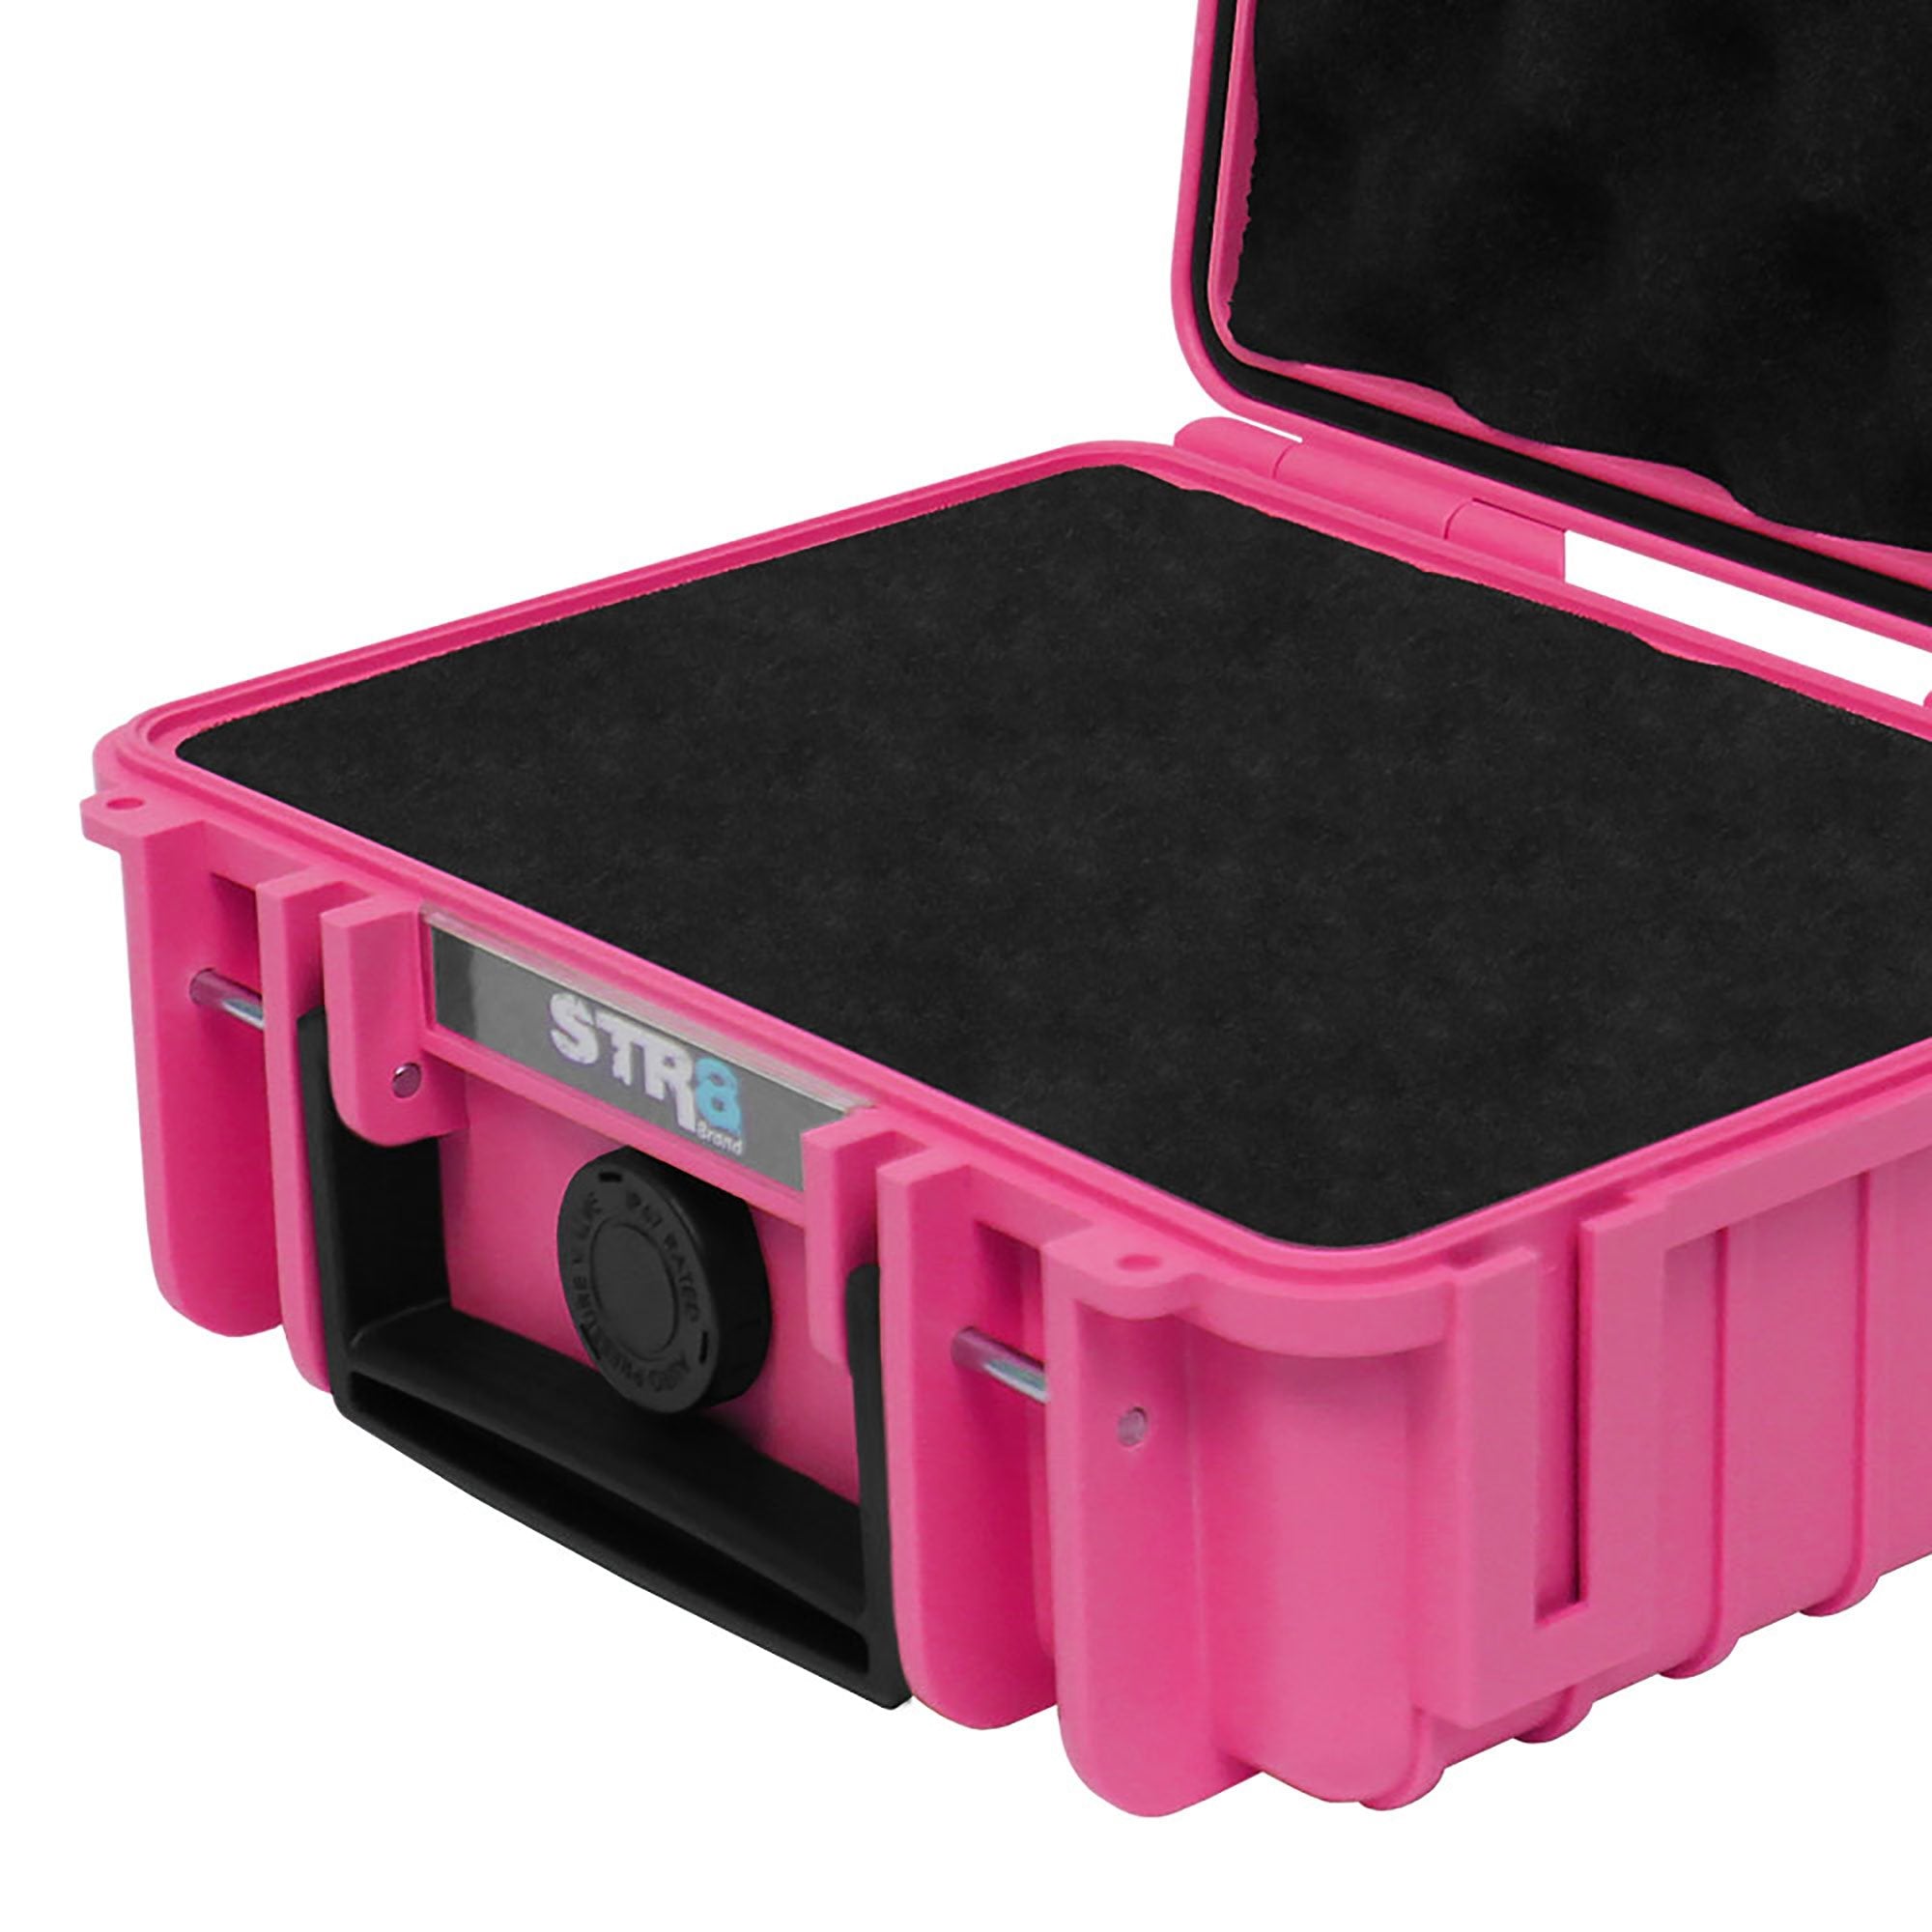 8" 2 Layer Electric Pink STR8 Case - 4